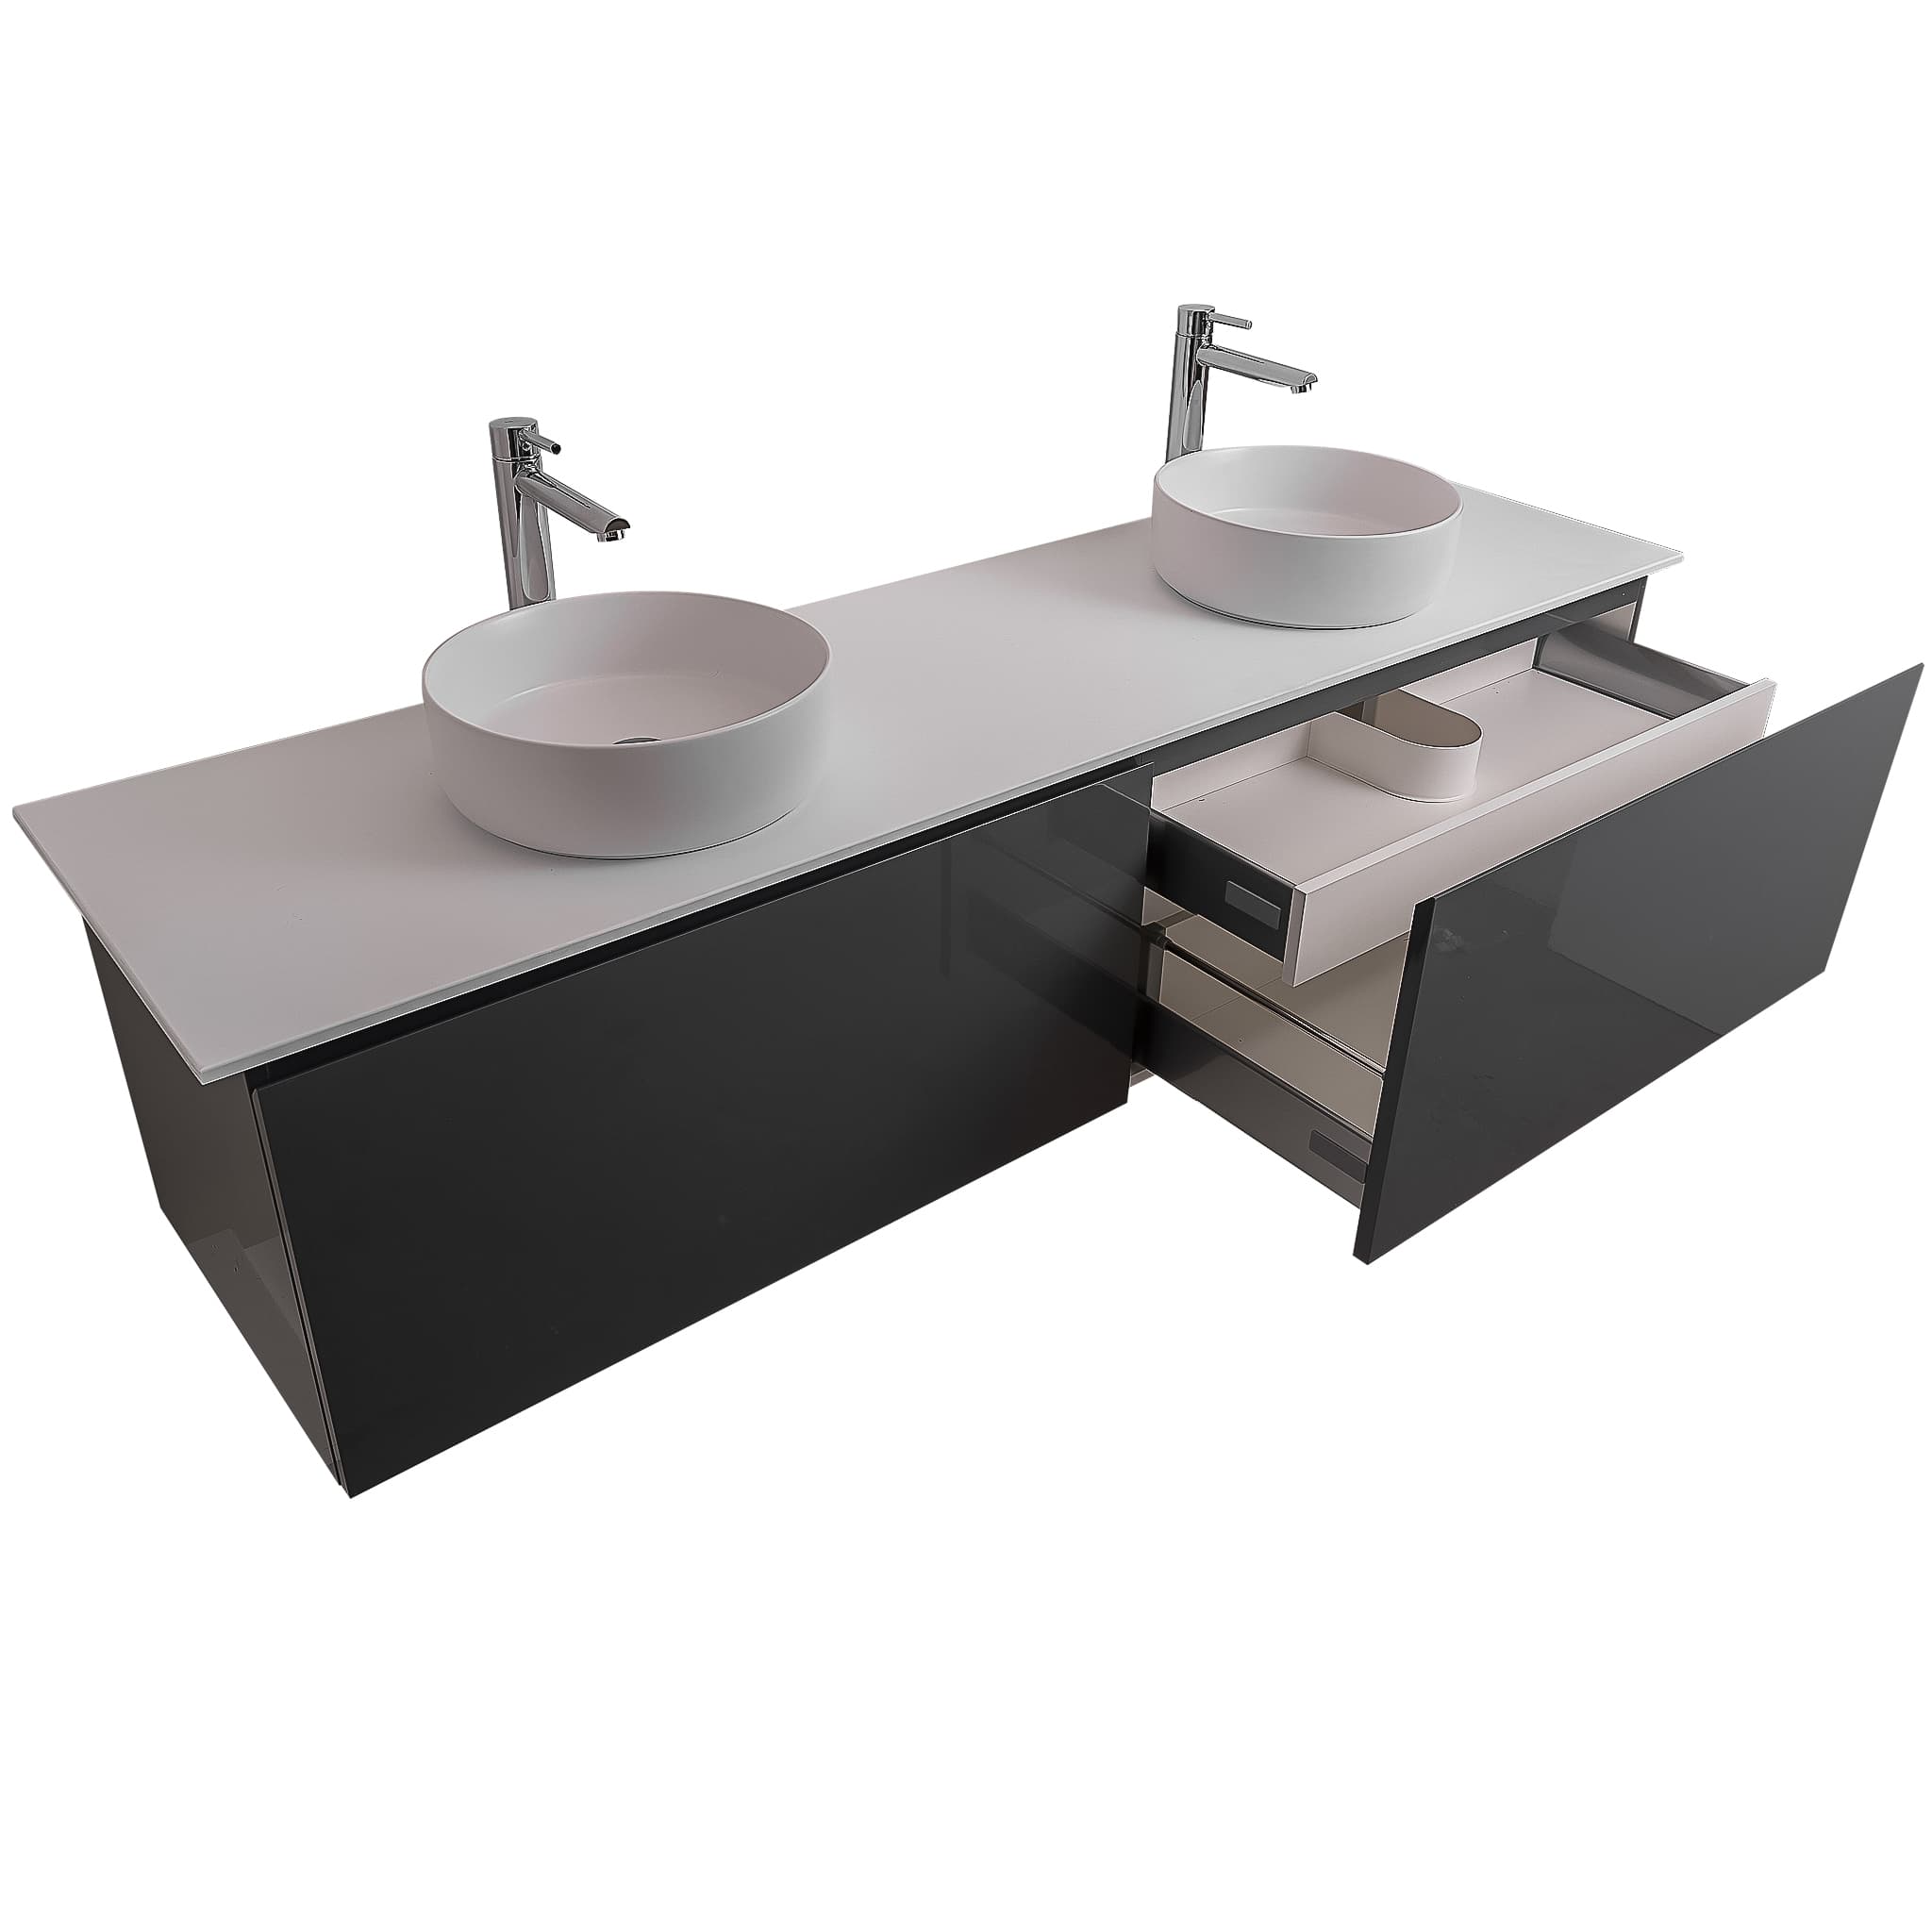 Venice 72 Anthracite High Gloss Cabinet,  Ares White Top And Two Ares White Ceramic Basin, Wall Mounted Modern Vanity Set